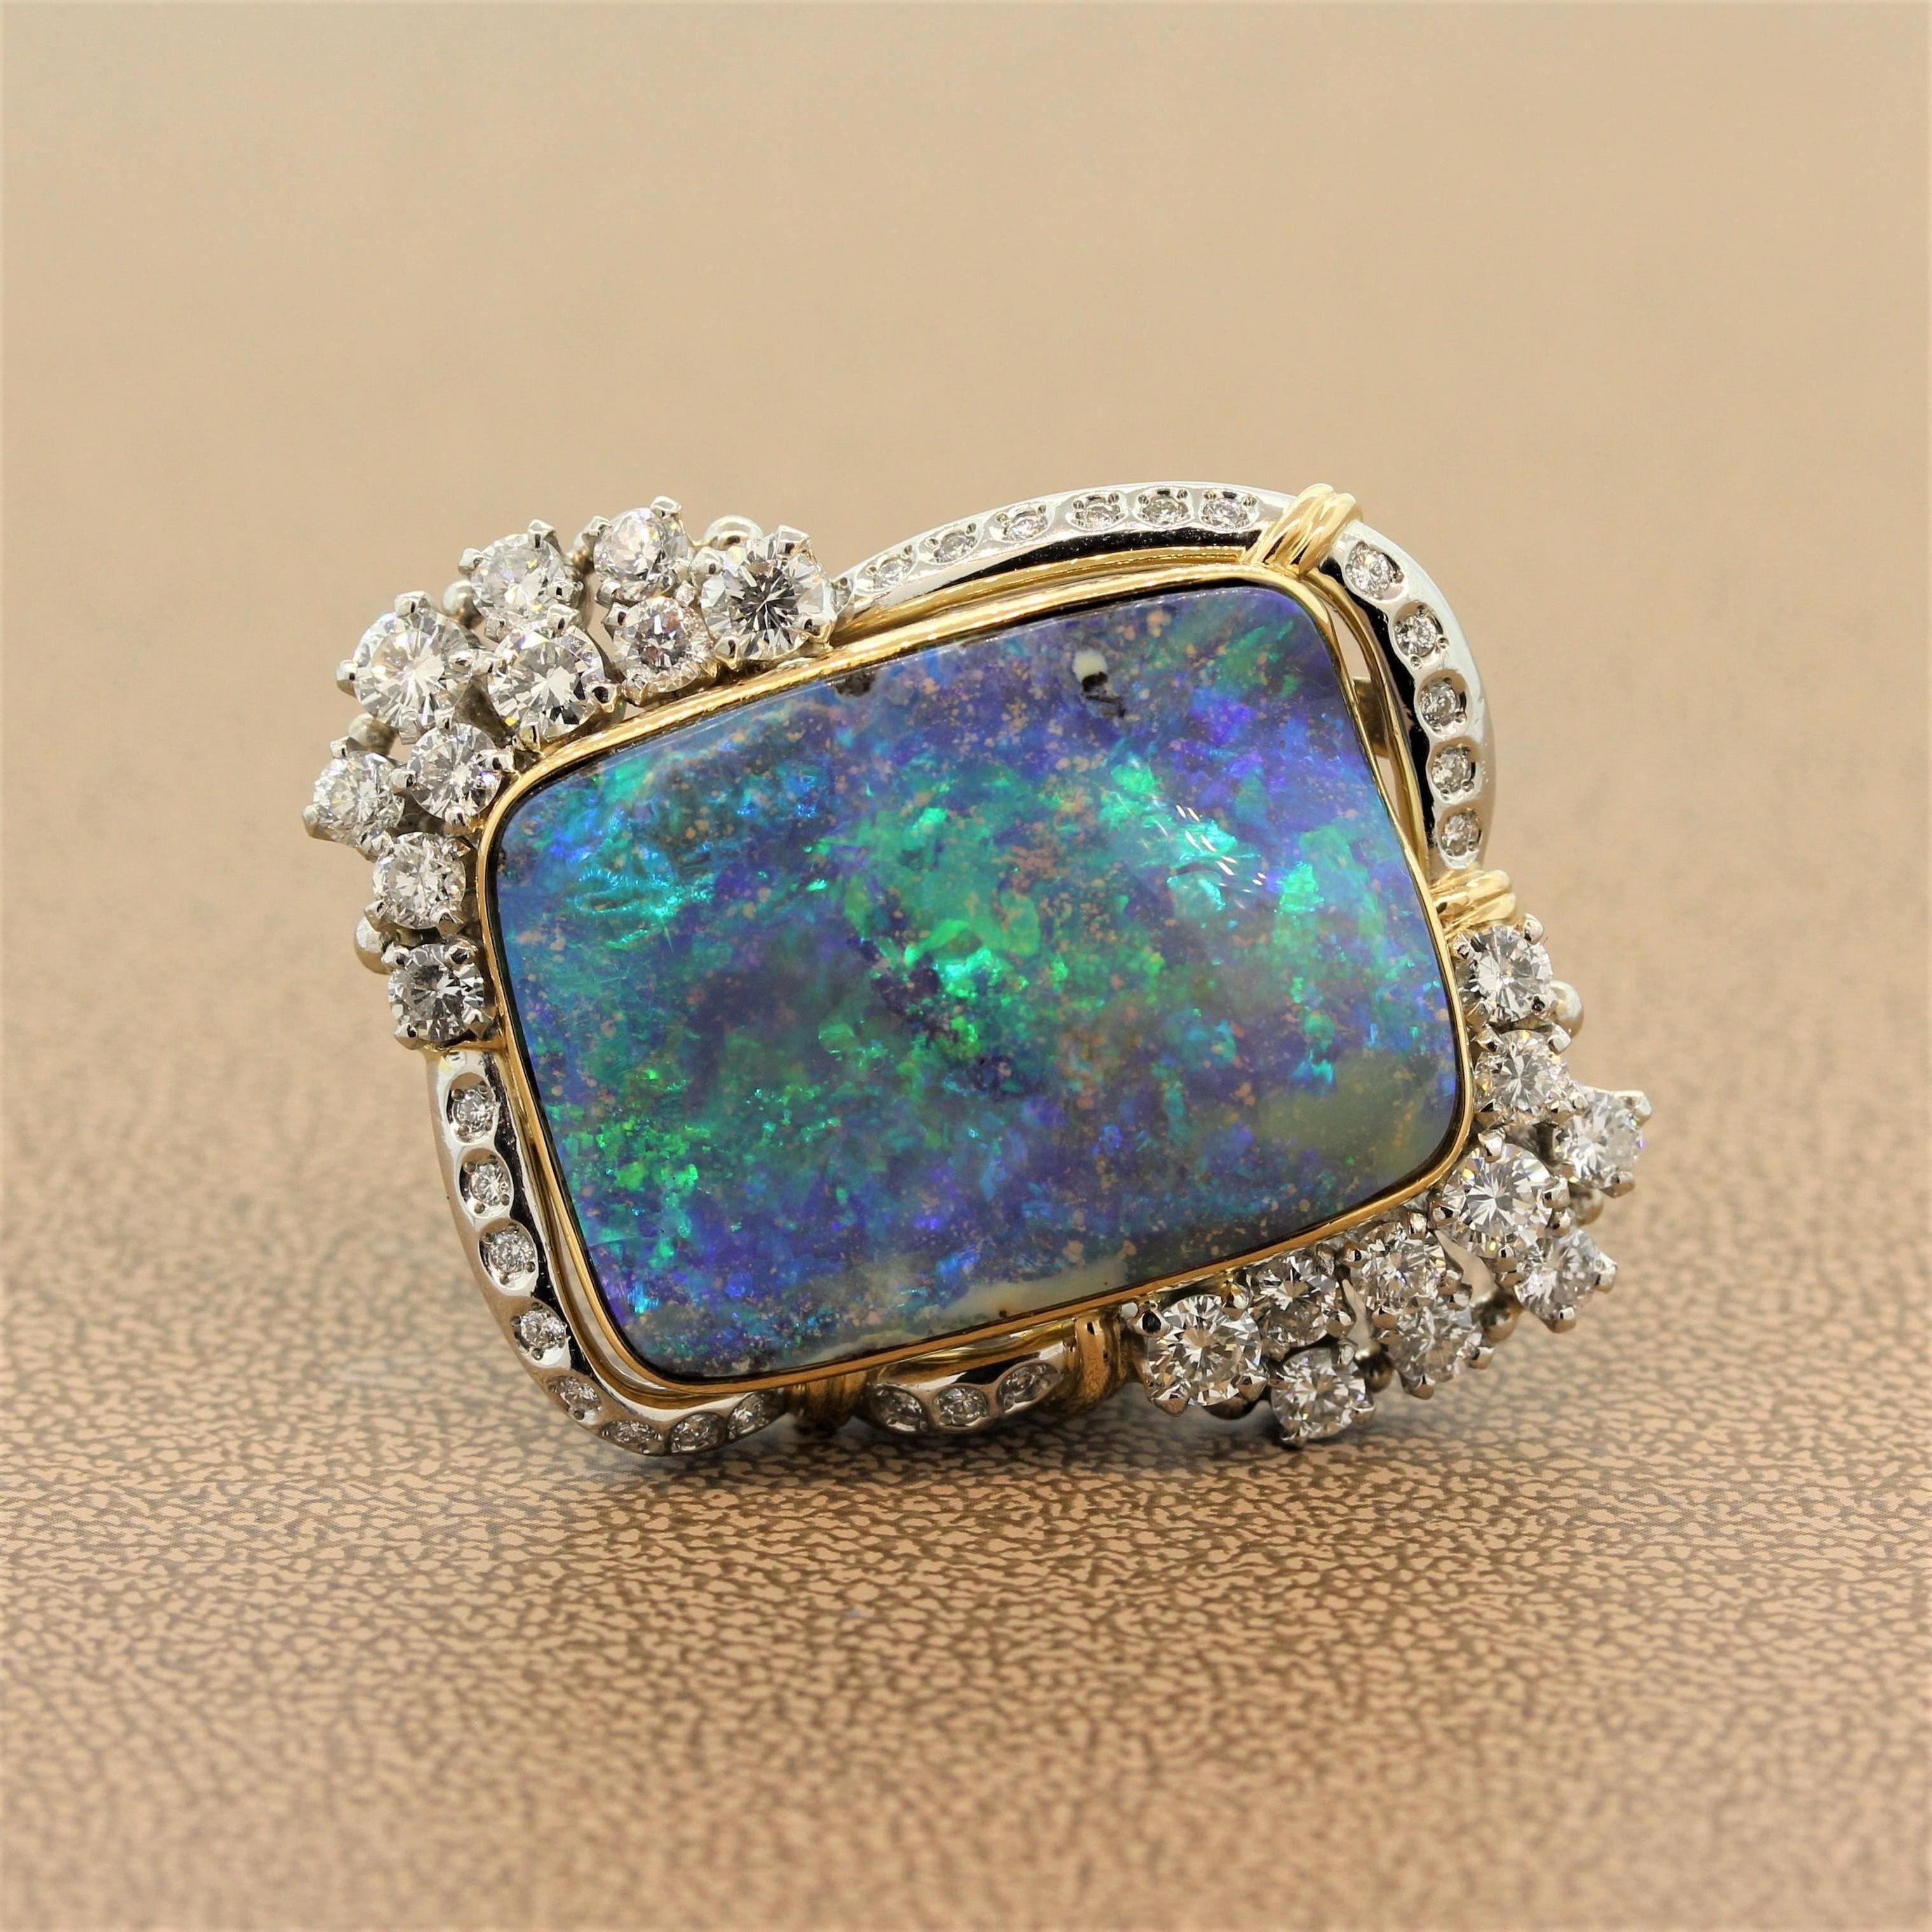 A seriously special cocktail ring featuring a large 37.73 carat boulder opal from Lightning Ridge Australian home to the finest opal in the world. The gem has fantastic play of color as it moves in the light and shows bright flashes of blue and